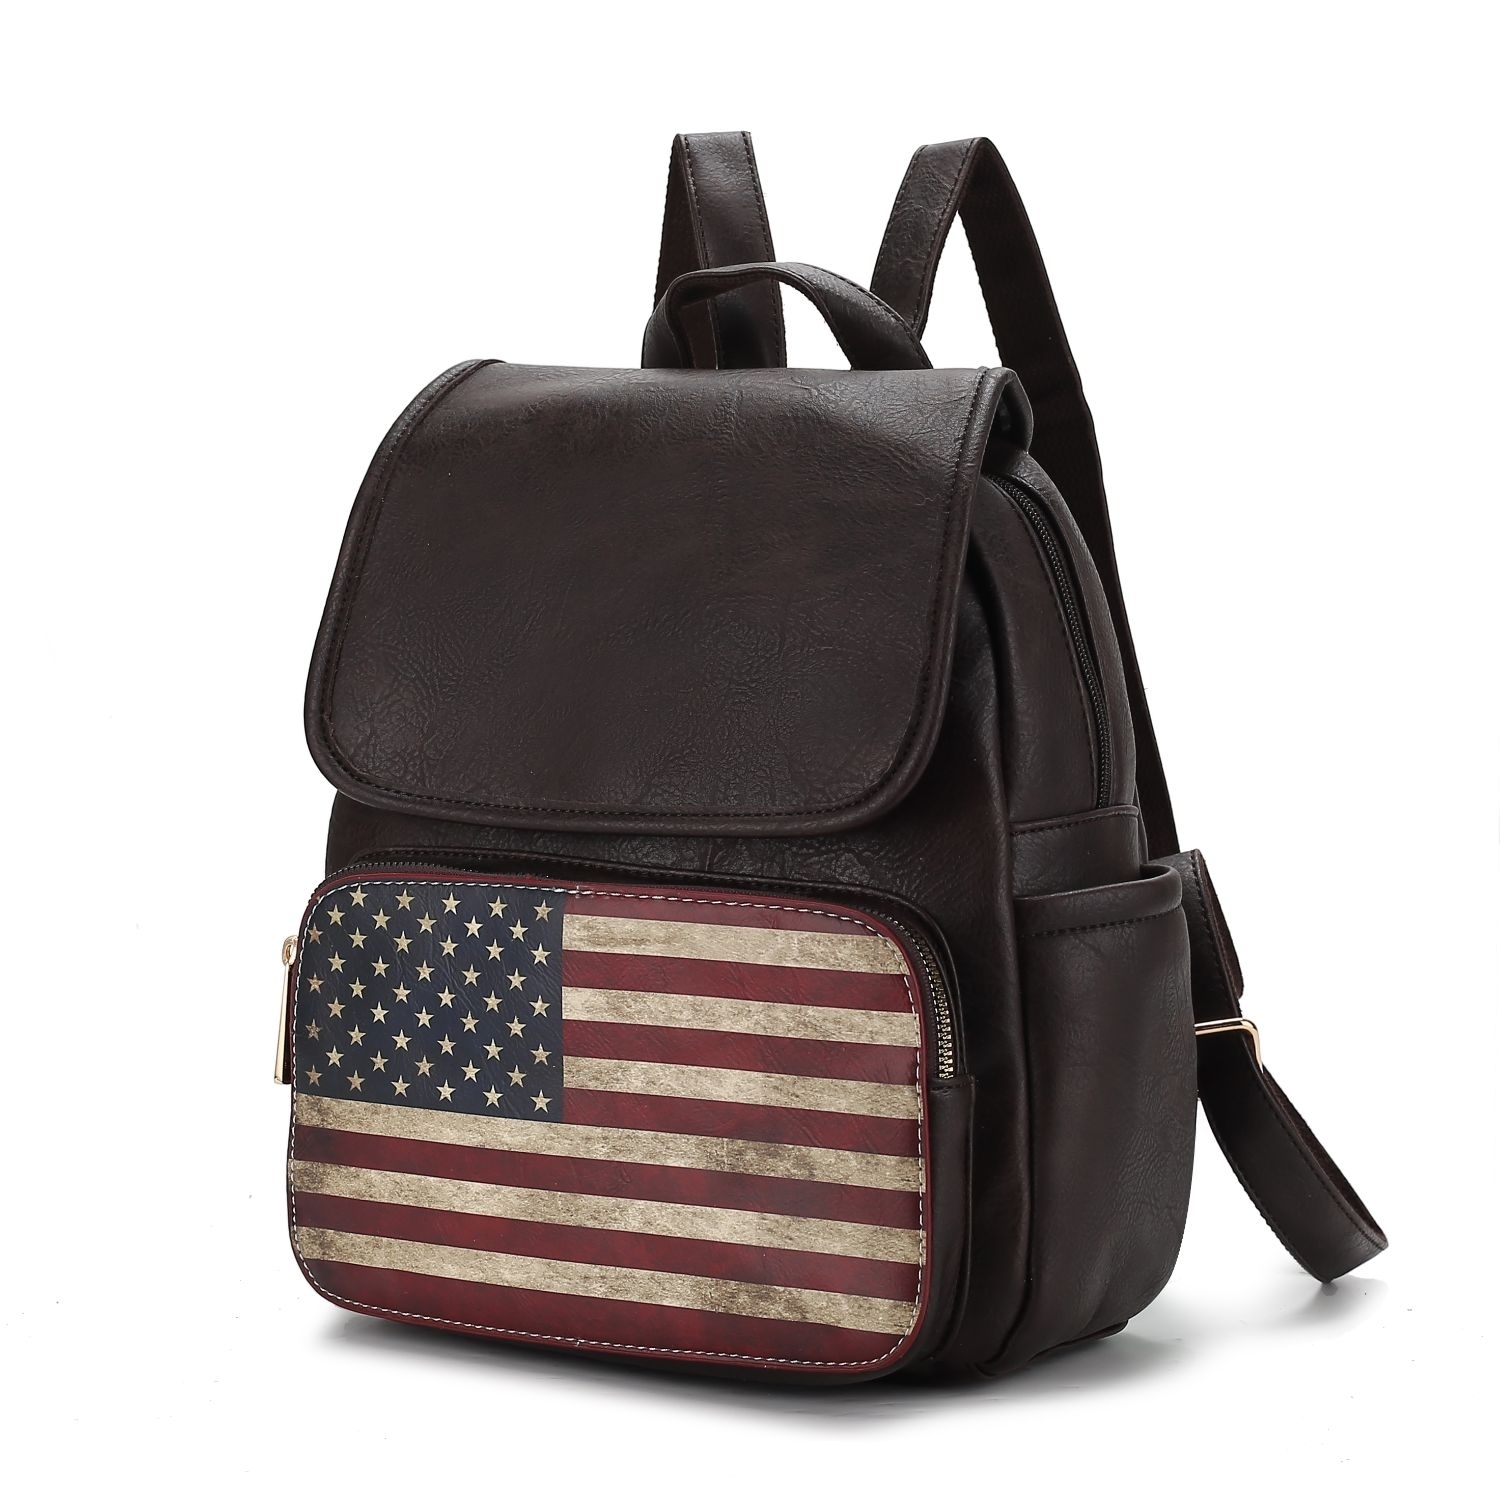 MKF Collection Regina Printed Flag Vegan Leather Womens Backpack By Mia K - Chocolate